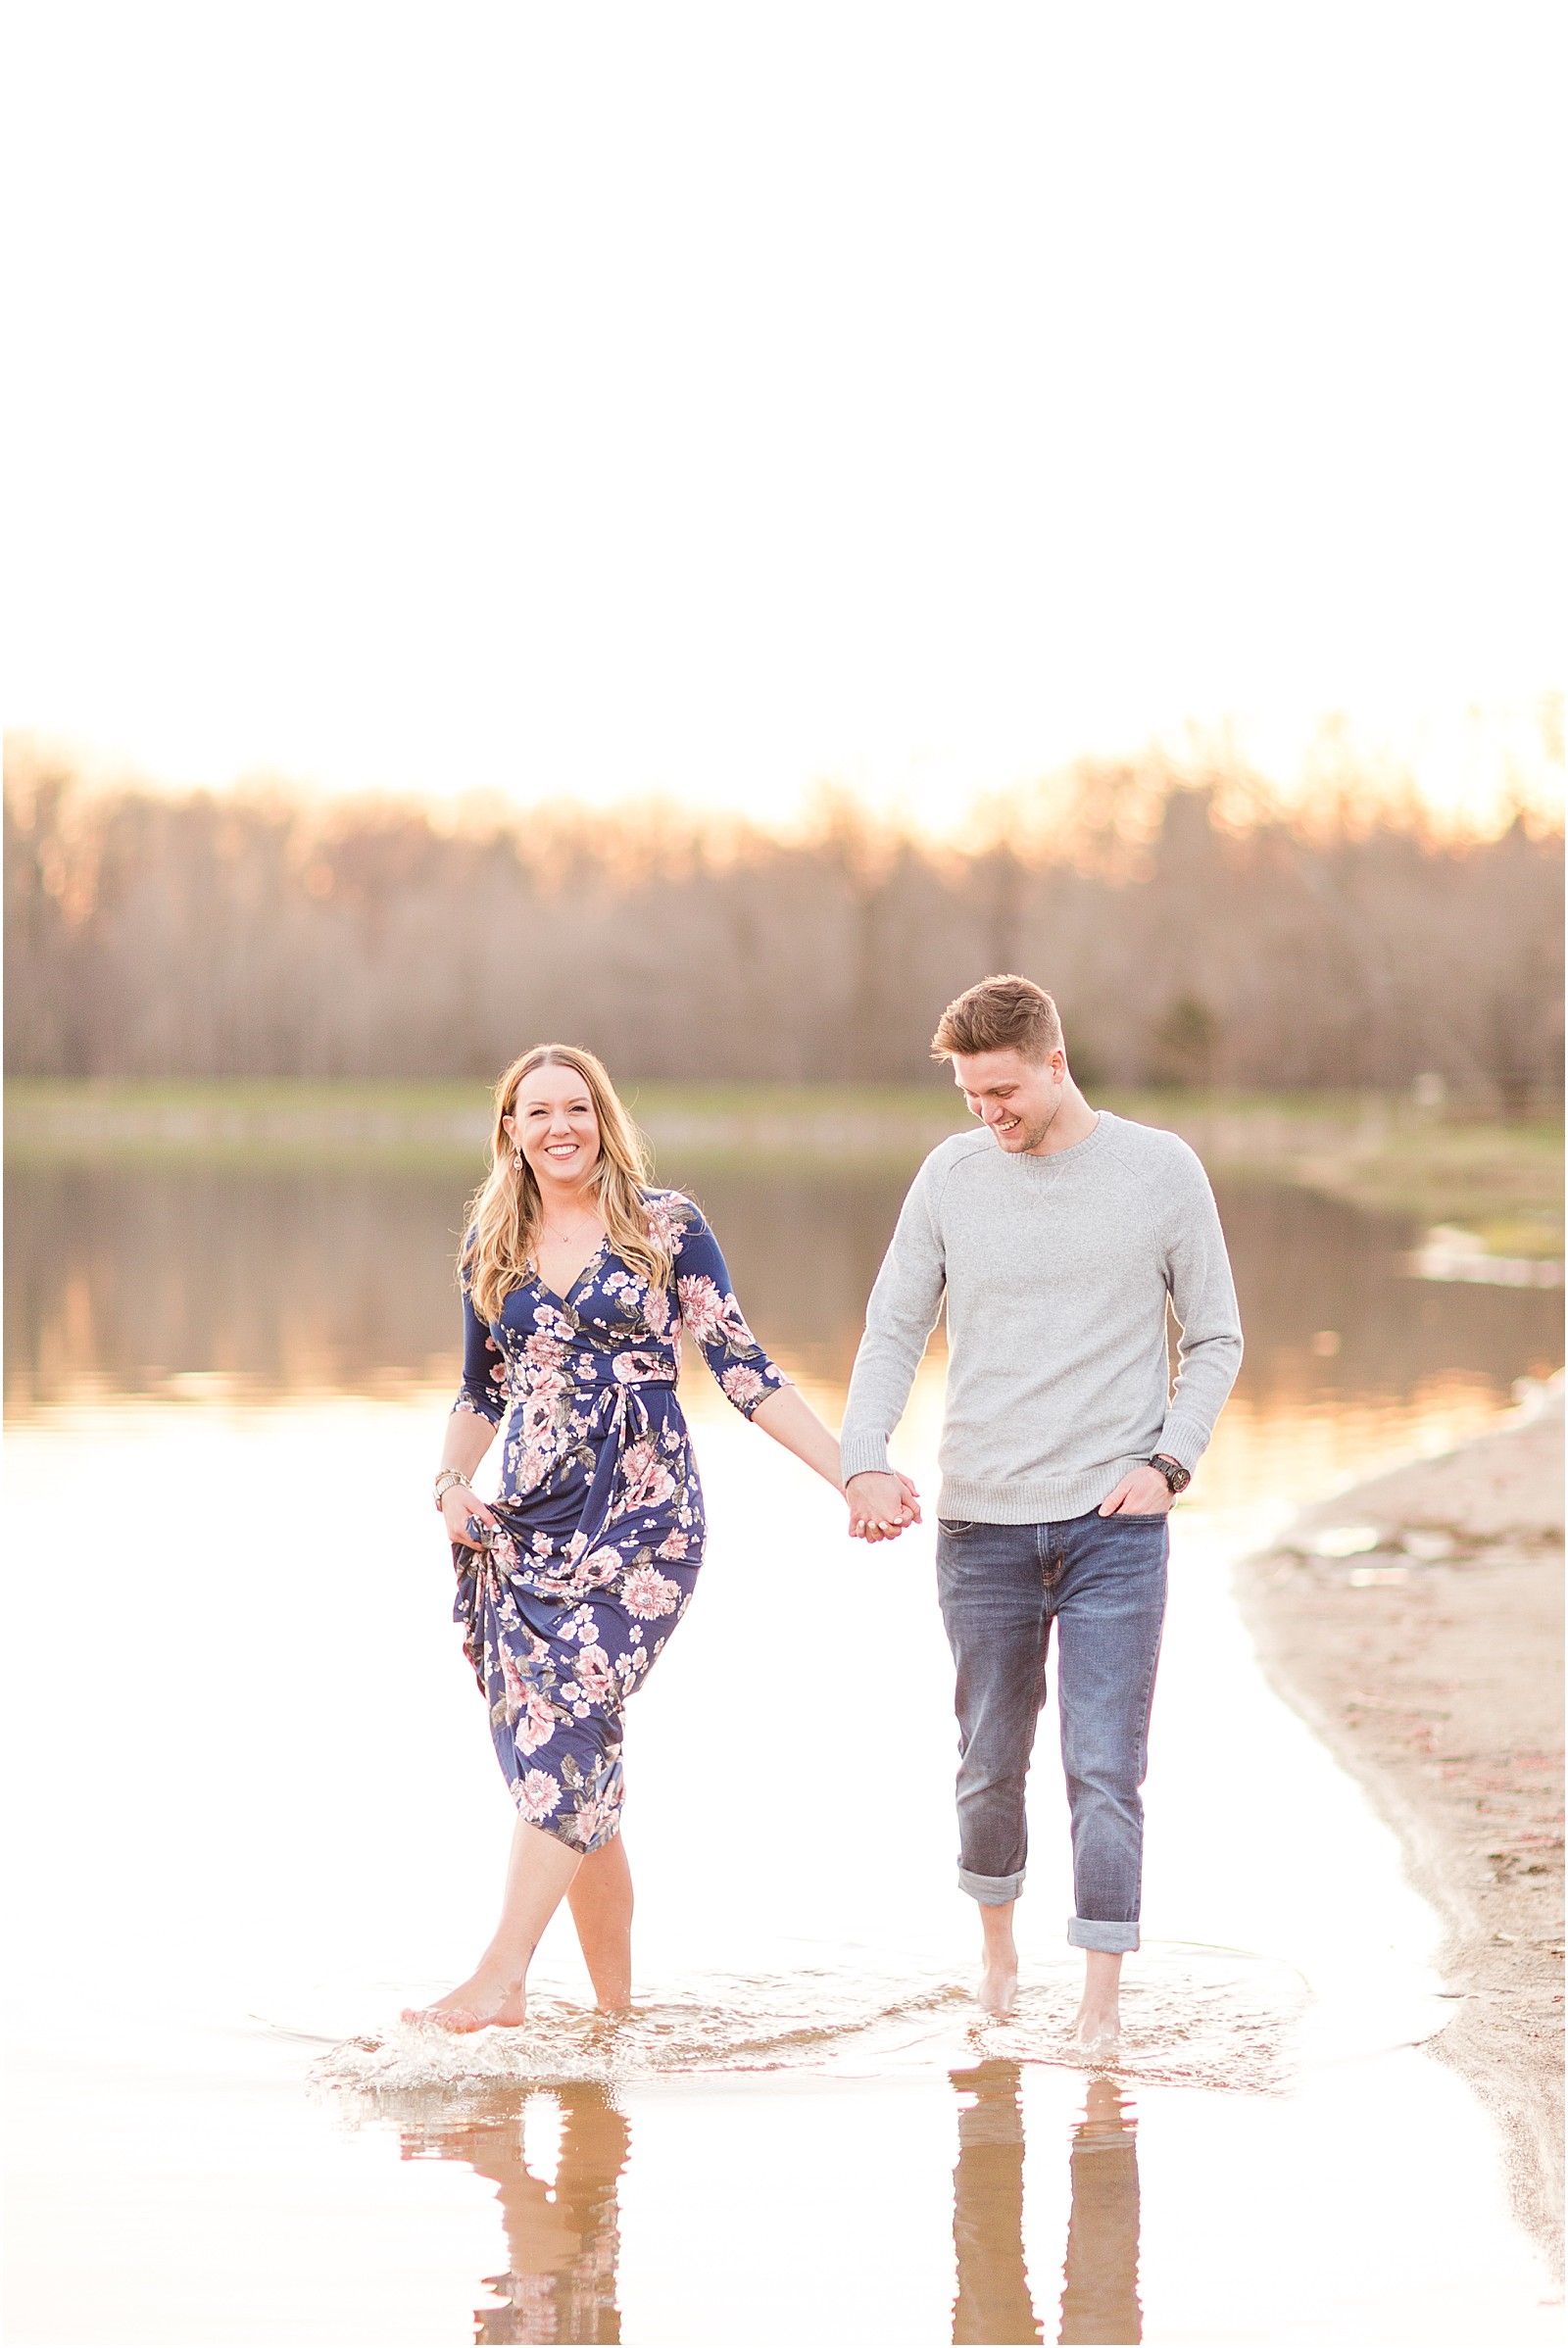 Rachel and Nick | Lincoln State Park Engagement Session 028.jpg